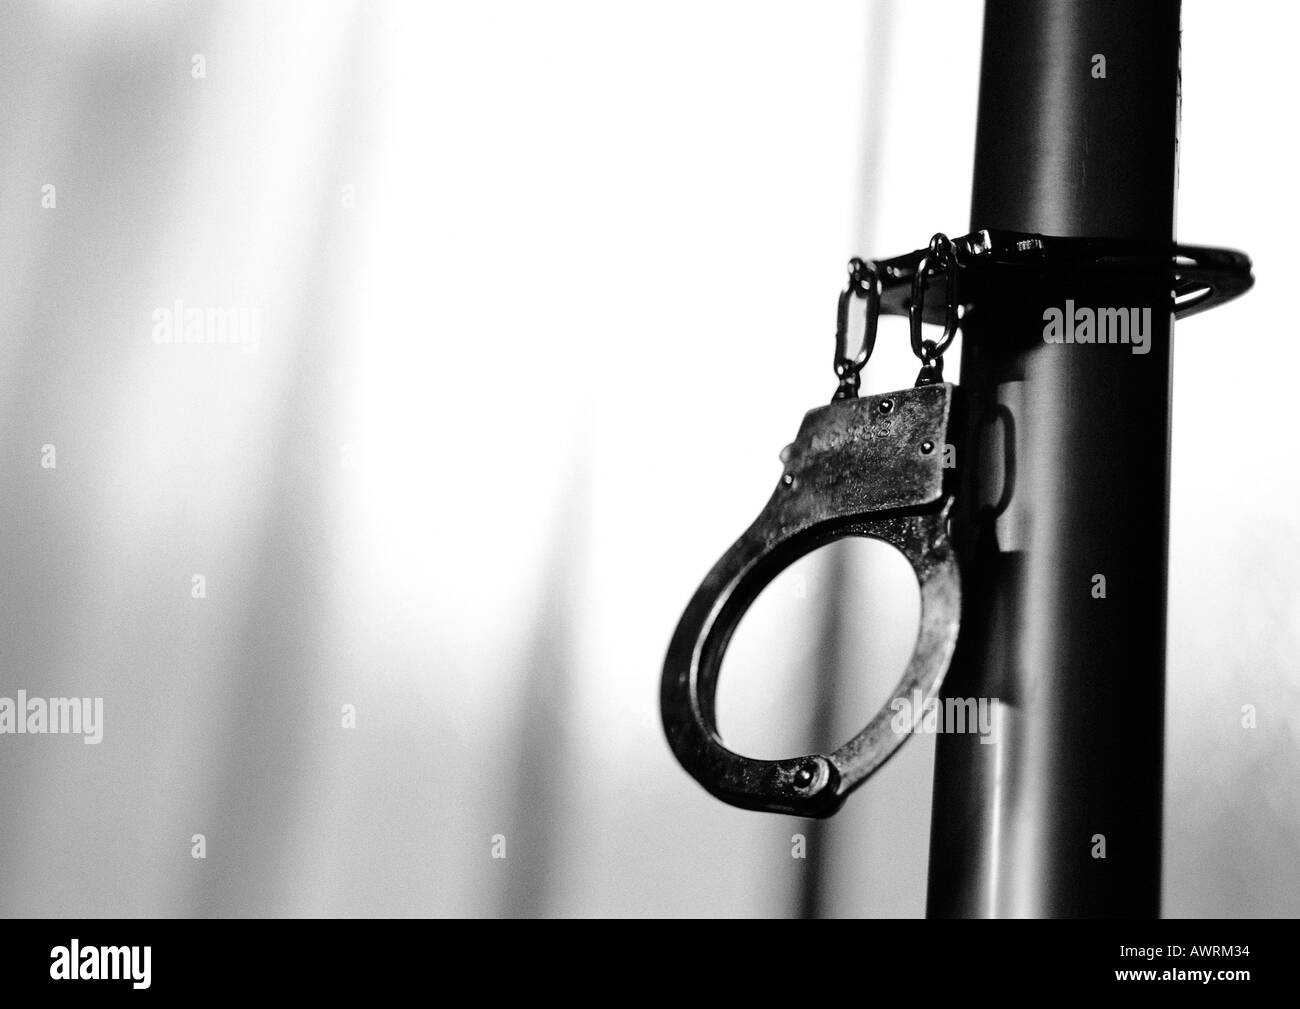 Handcuffs attached to pipe, b&w. Stock Photo